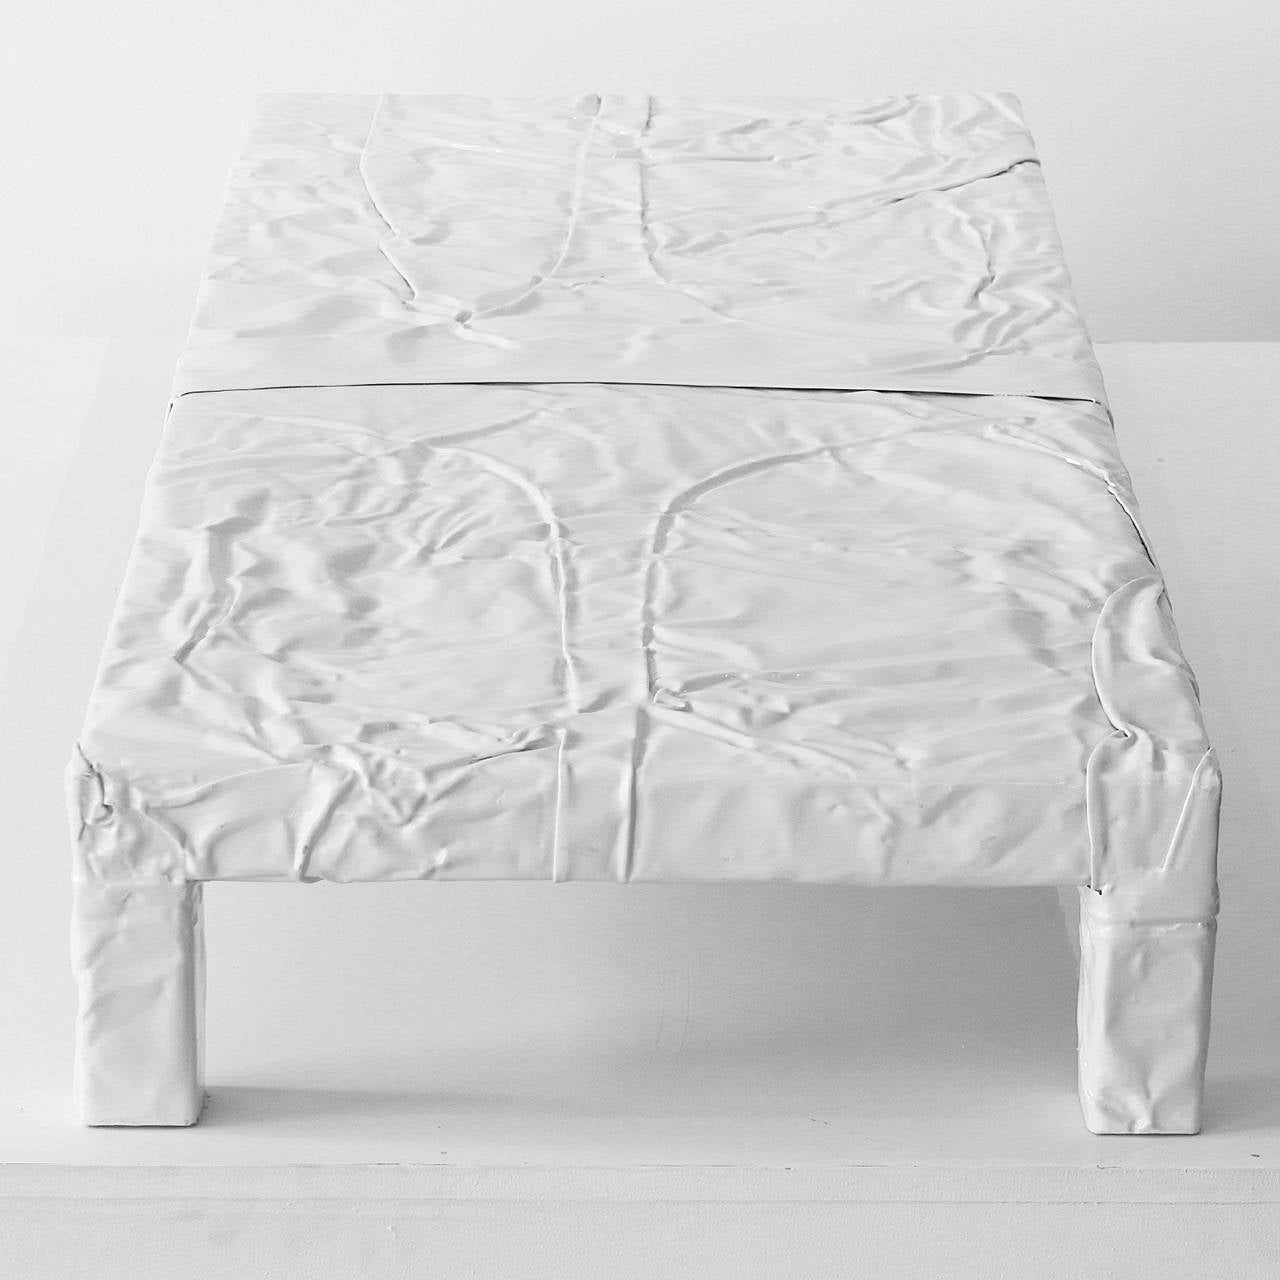 Contemporary Mesa CARS branca/CARS Coffee Table In White by Alê Jordão For Sale